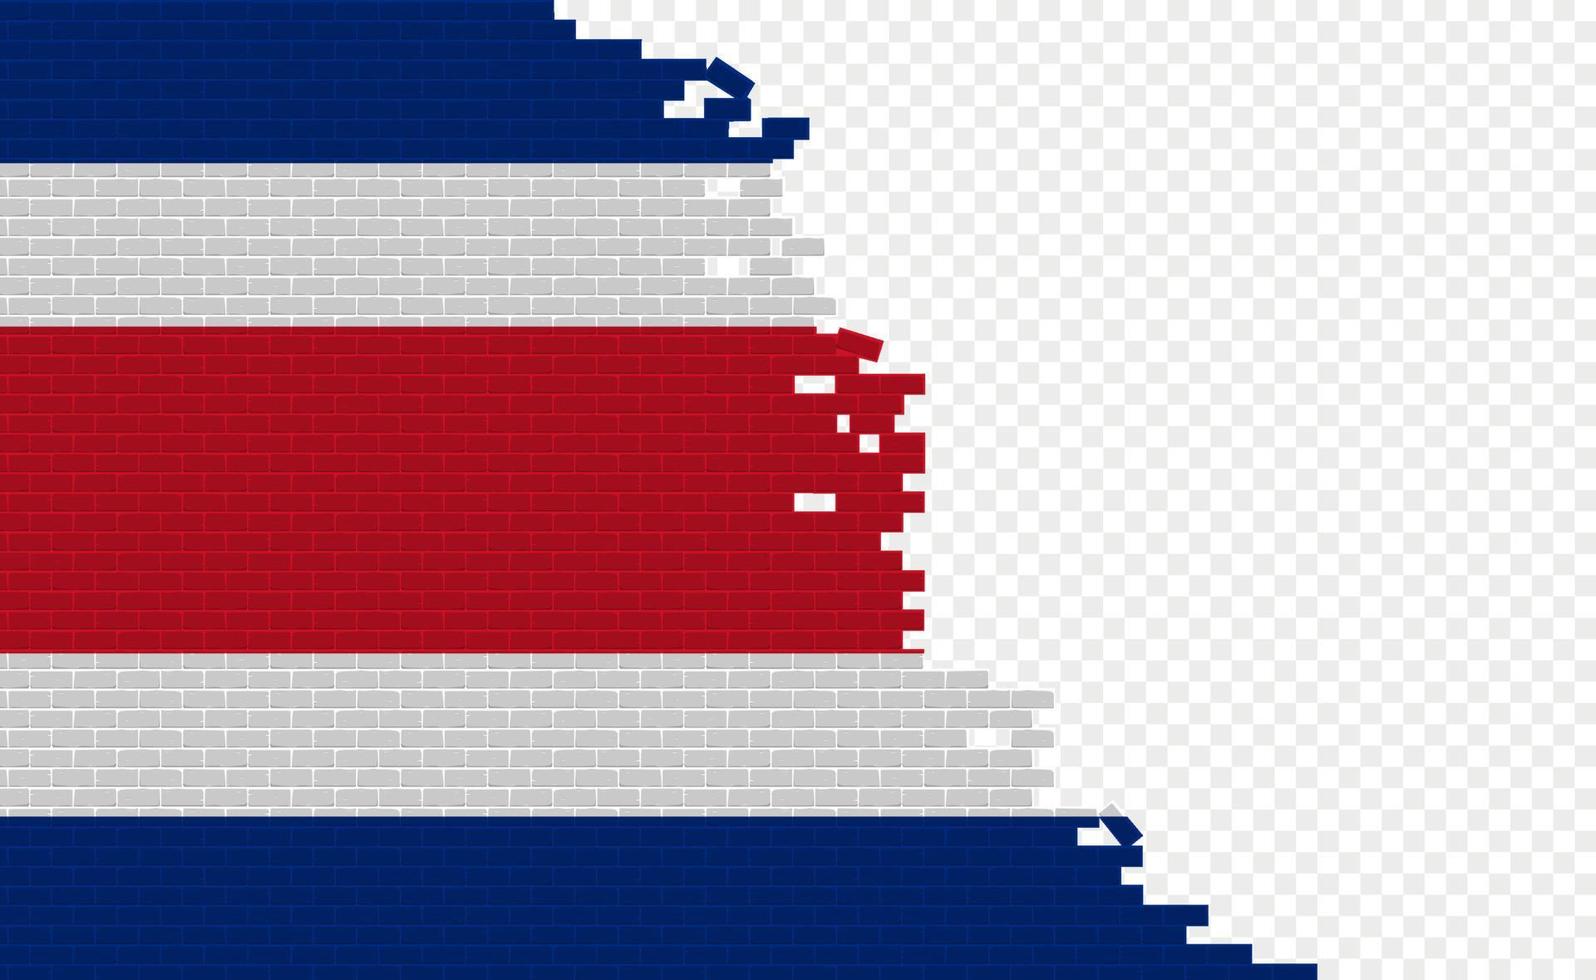 Costa Rica flag on broken brick wall. Empty flag field of another country. Country comparison. Easy editing and vector in groups.